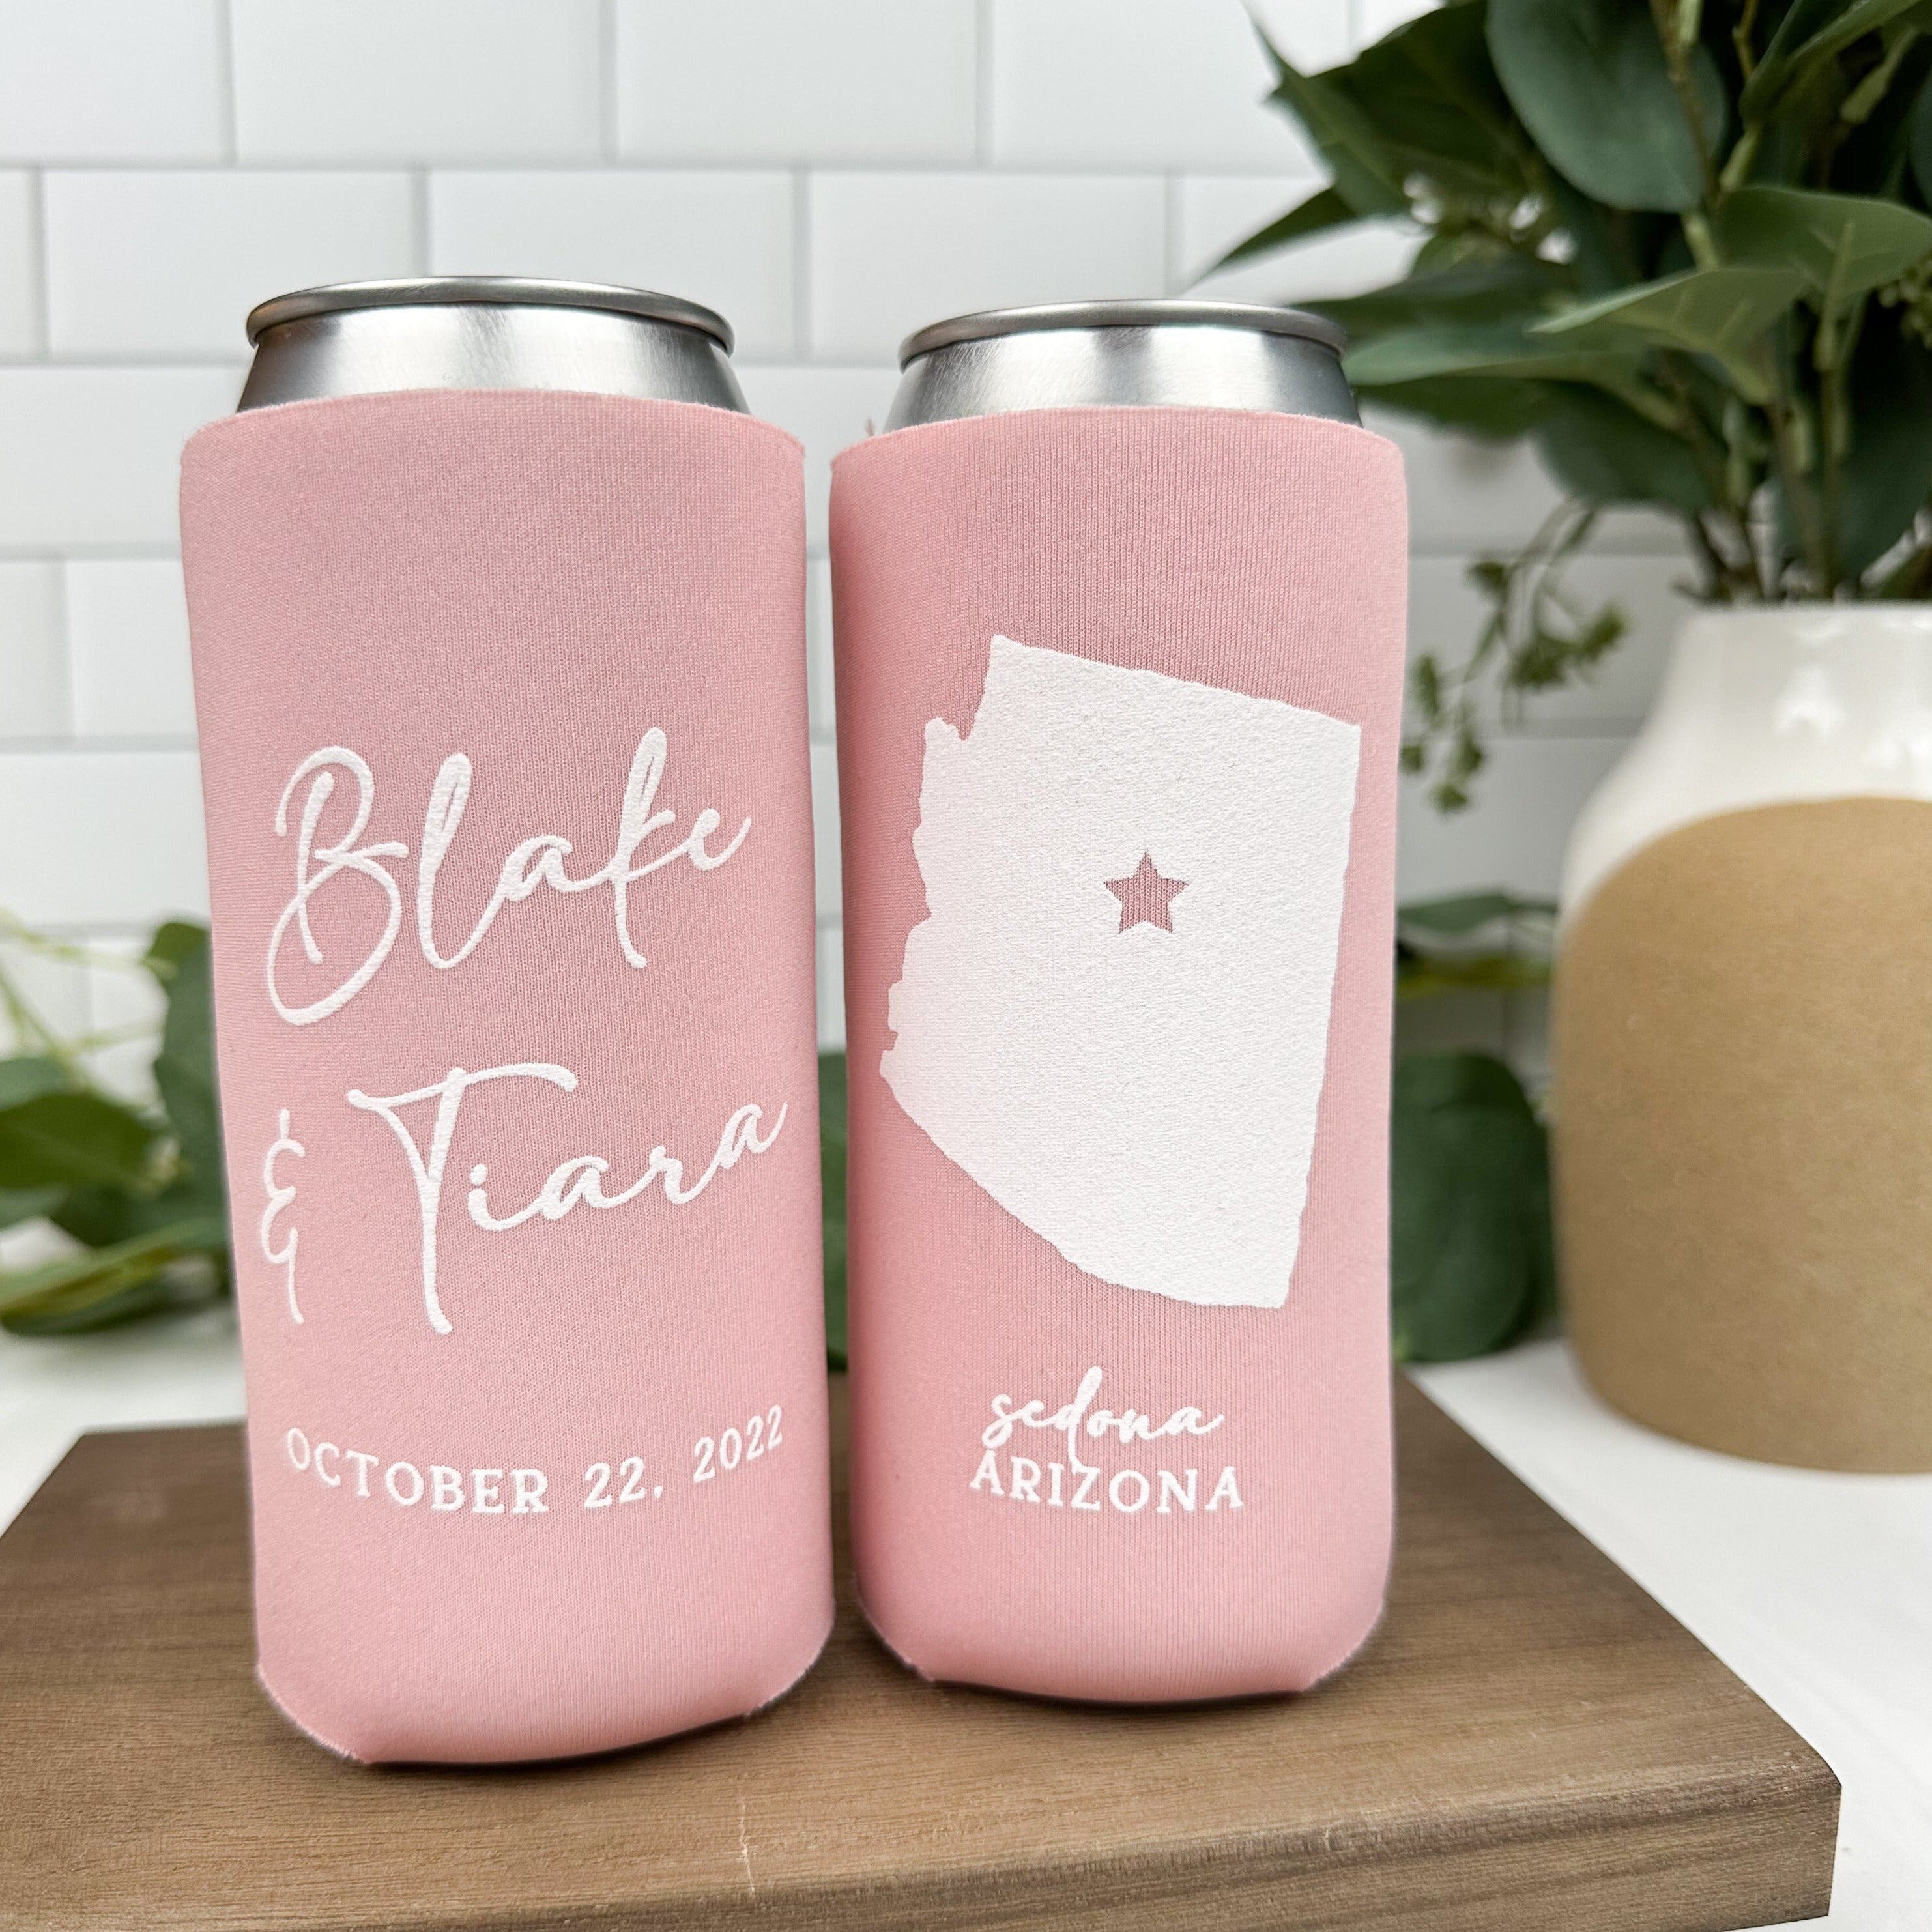 Custom wedding slim can coolers in the color of dusty rose, featuring a state outline